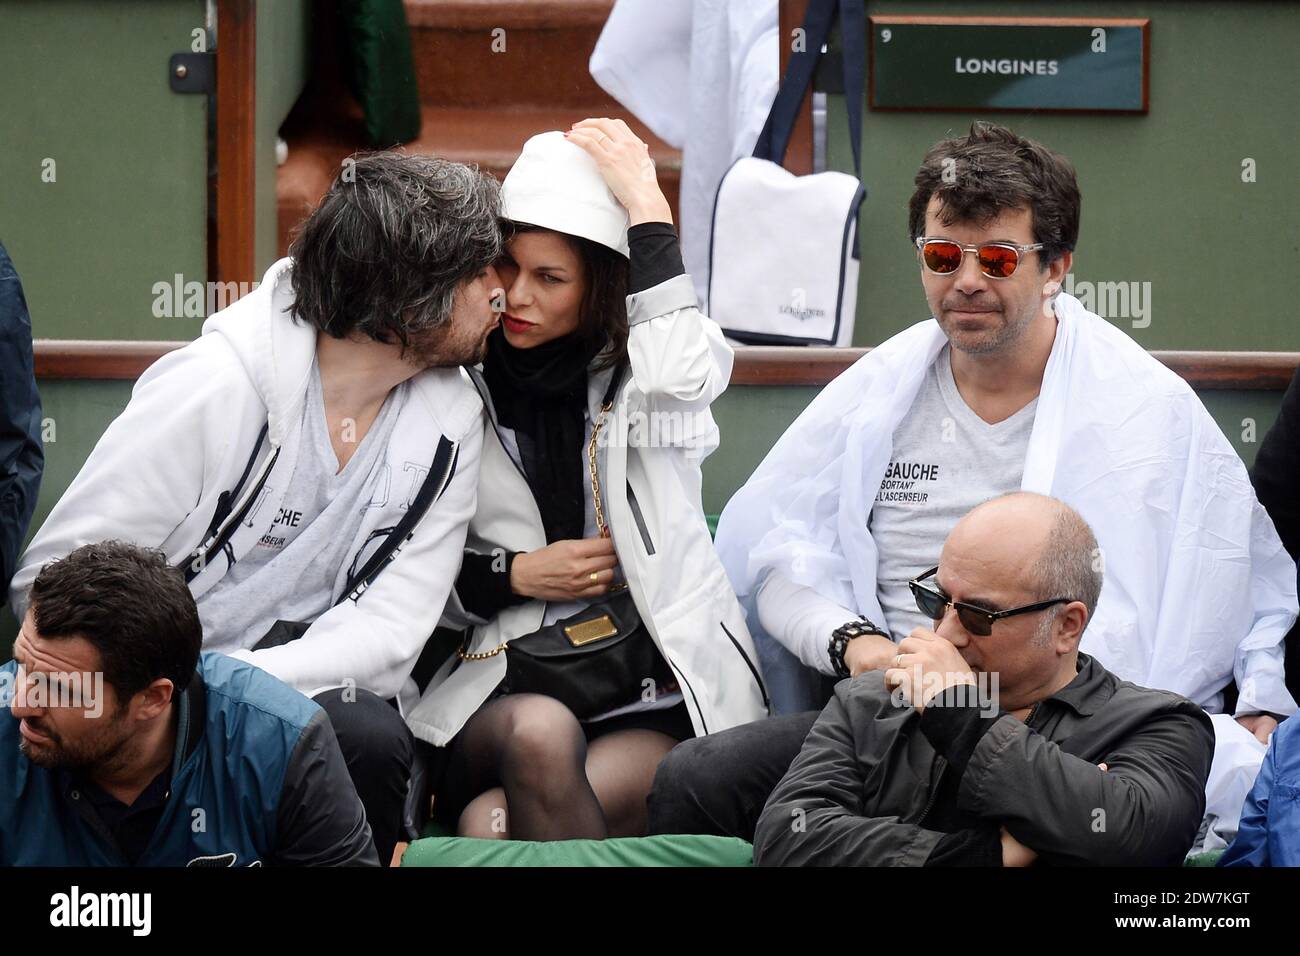 Boris Soulages Caroline Burgues And Stephane Plaza Watching A Game During The First Round Of The French Tennis Open At Roland Garros Arena In Paris France On May 26 2014 Photo By